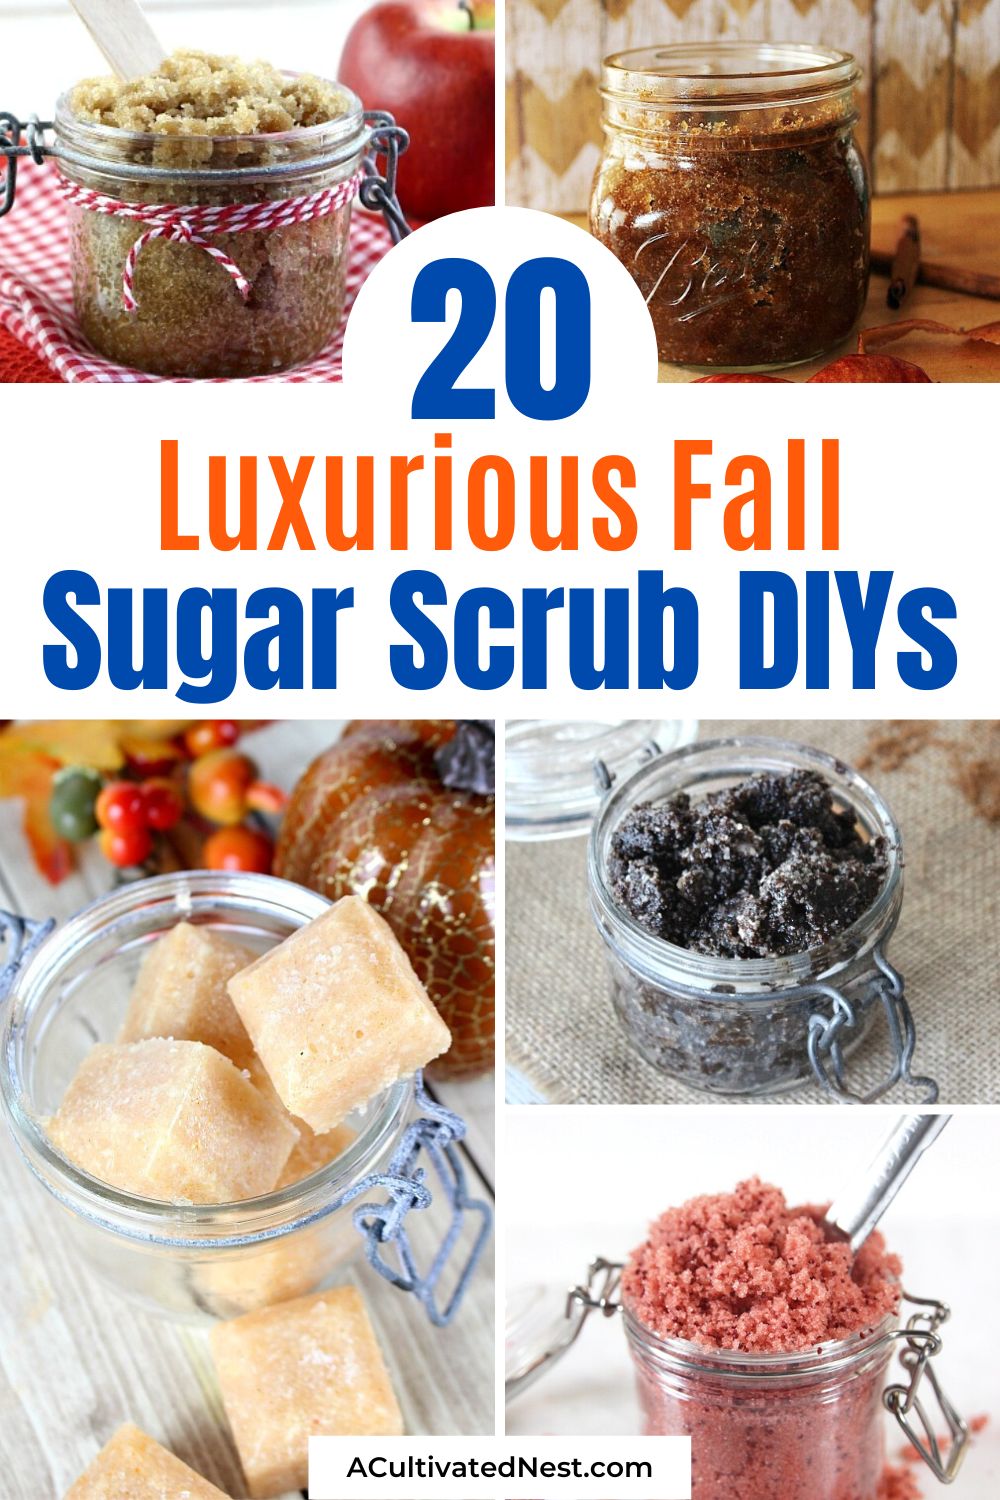 20 Luxurious DIY Fall Sugar Scrubs- If you want to relax and get your skin ready for cooler weather, then you'll love these luxurious DIY fall sugar scrubs! They make great DIY gifts! | autumn sugar scrubs, #DIYSugarScrubs #diyGiftIdeas #diyBeauty #bodyScrub #ACultivatedNest